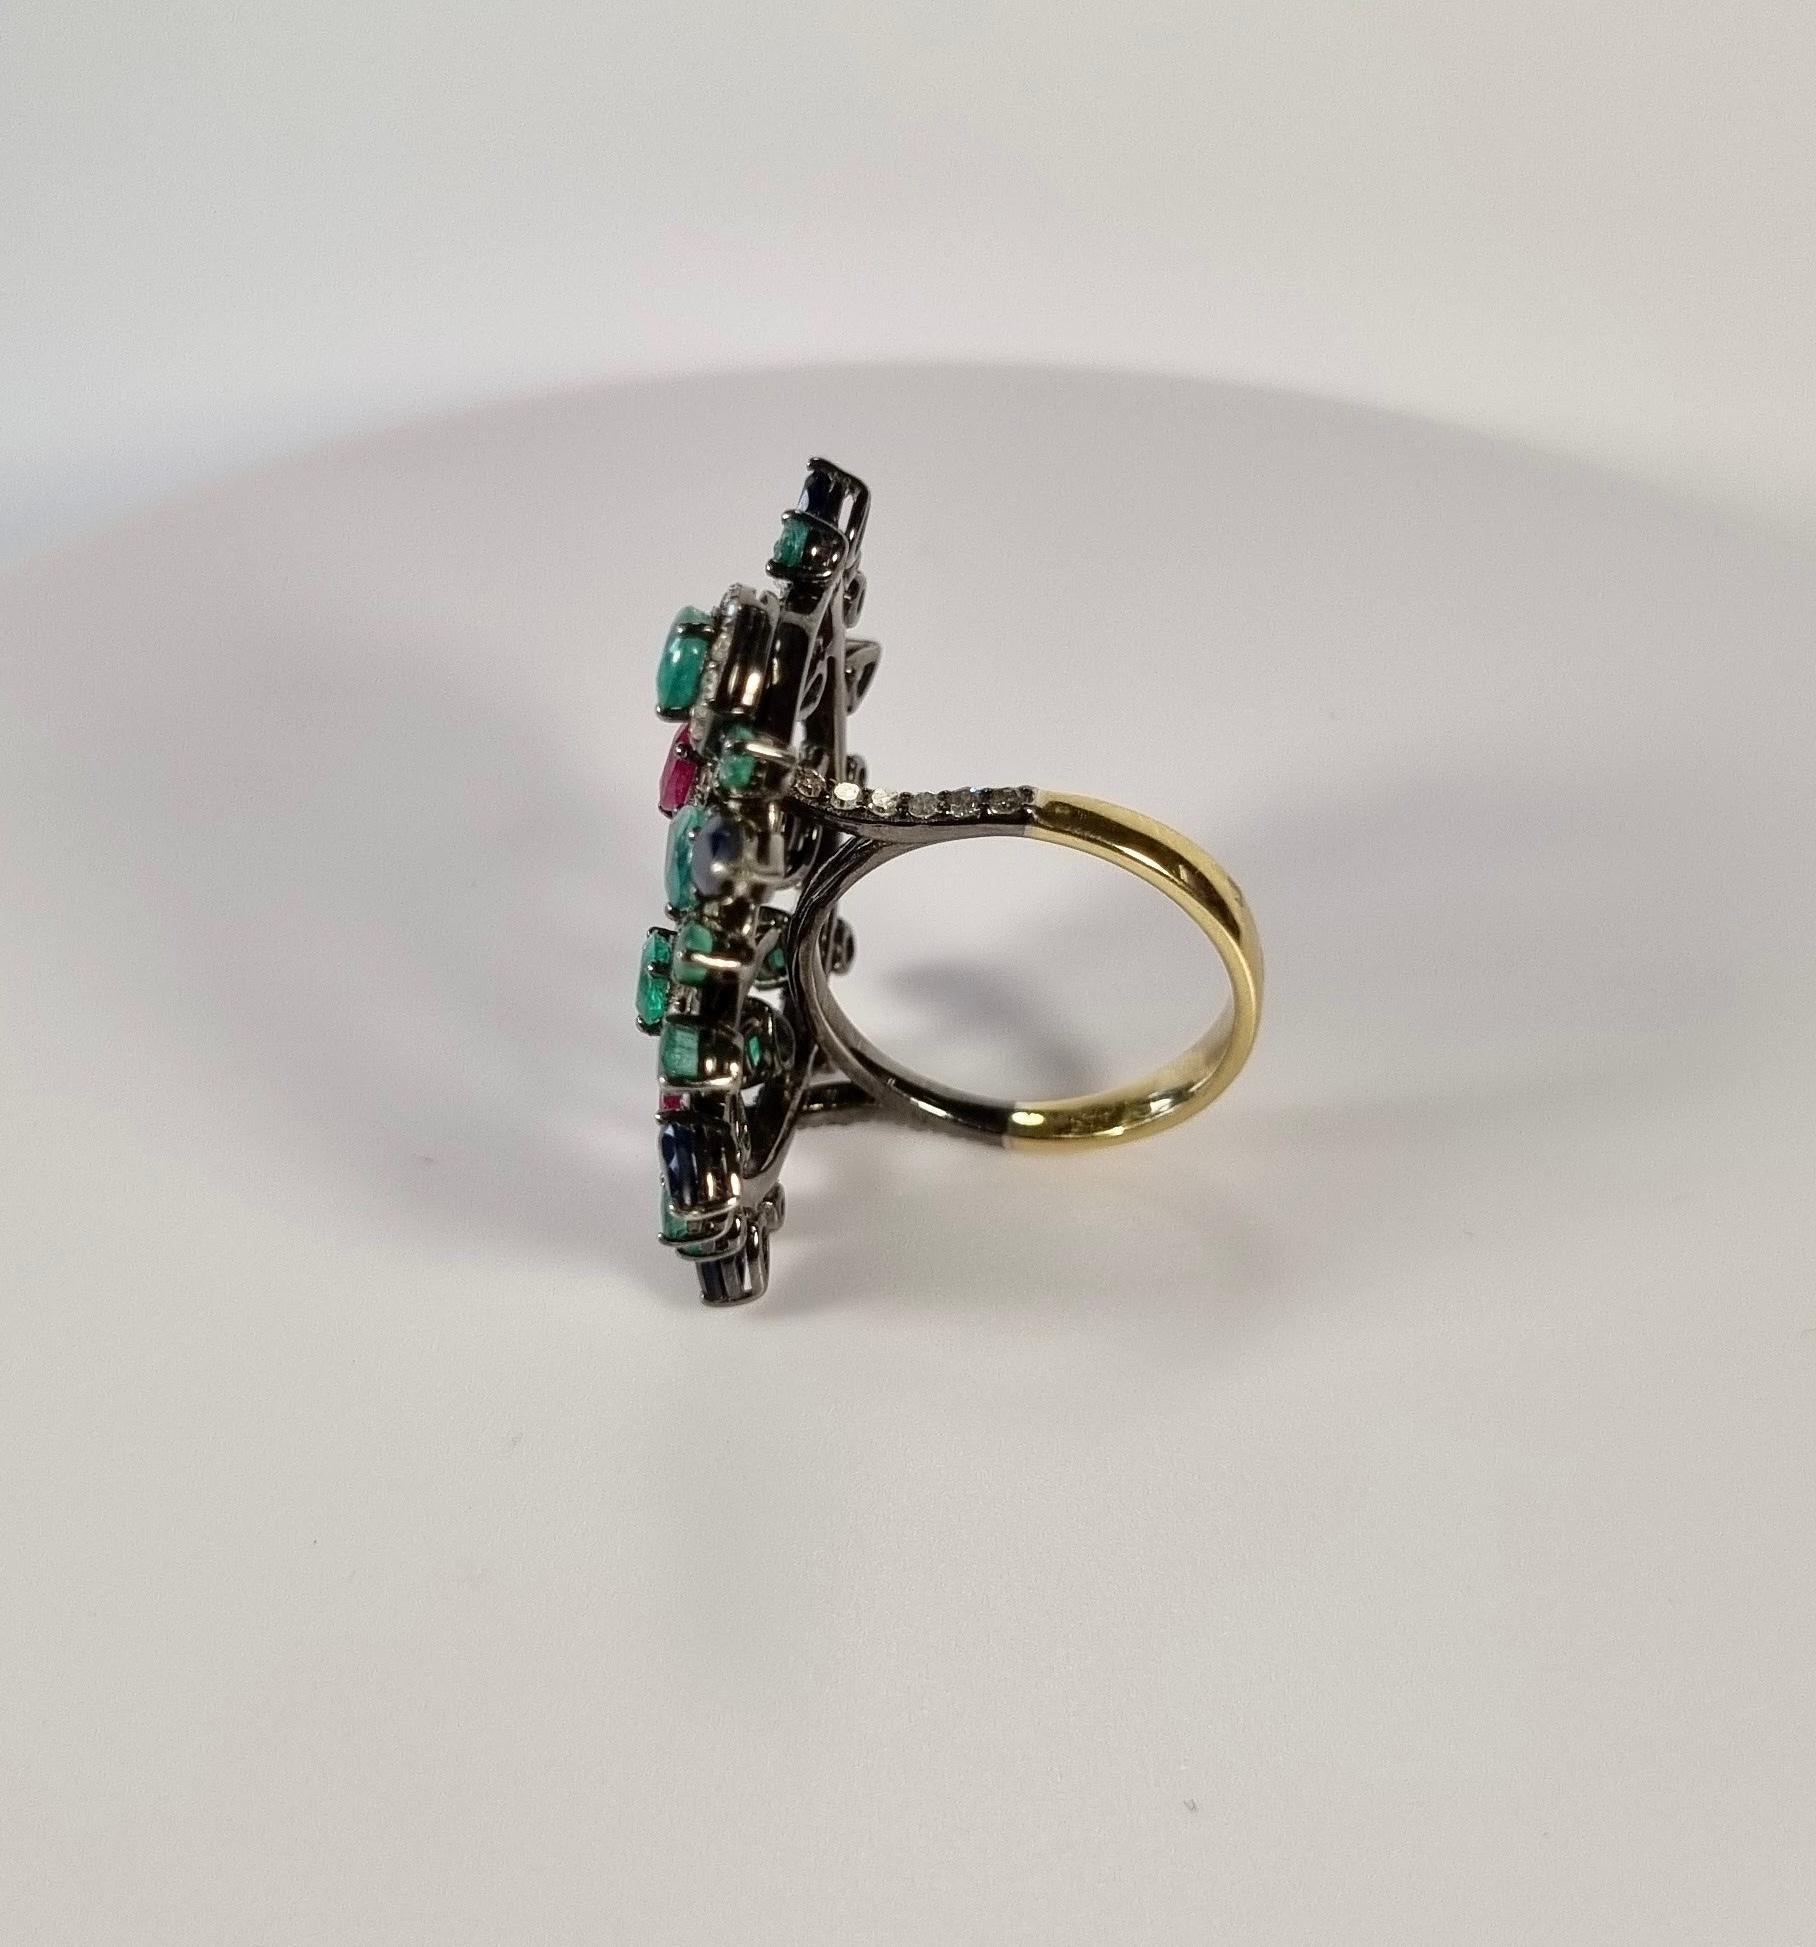 Irama Pradera is a Young designer from Spain that searches always for the best gems and combines classic with contemporary mounting and styles. 
Sleekly crafted in 18K white gold these romantic and sophisticated articulated movable ring gives a